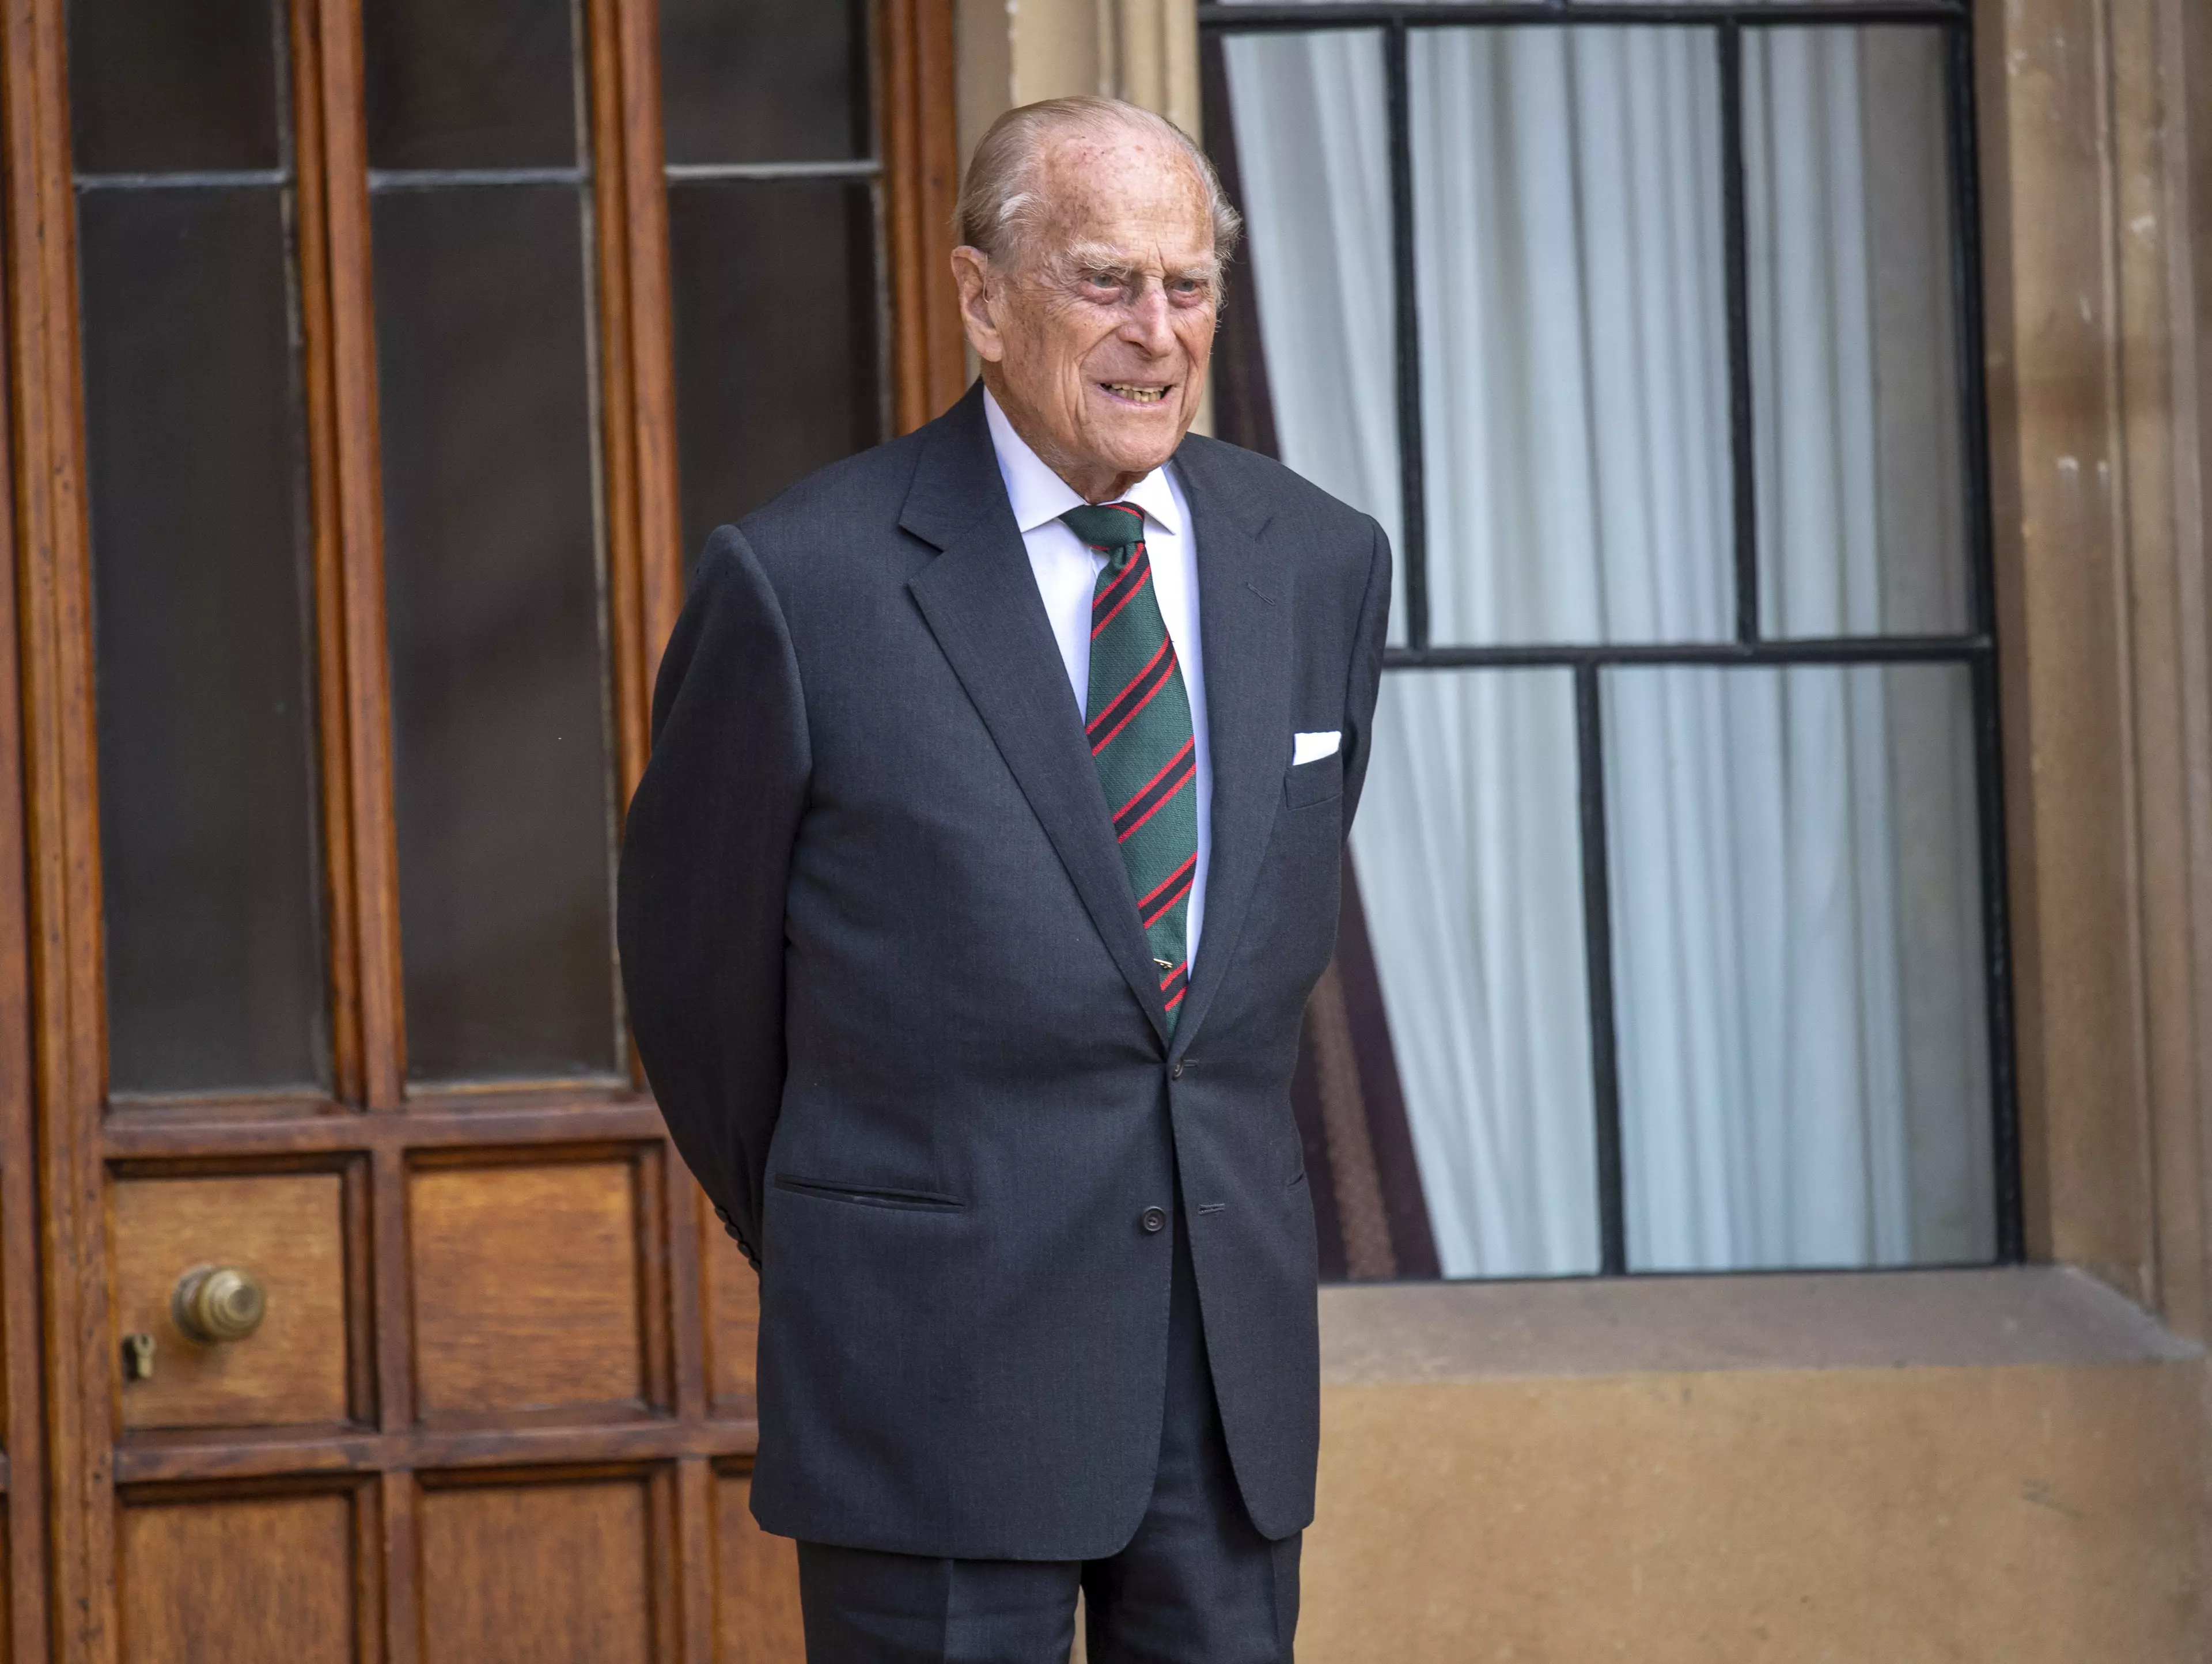 The actor will play Prince Phillip in the fifth and sixth seasons (